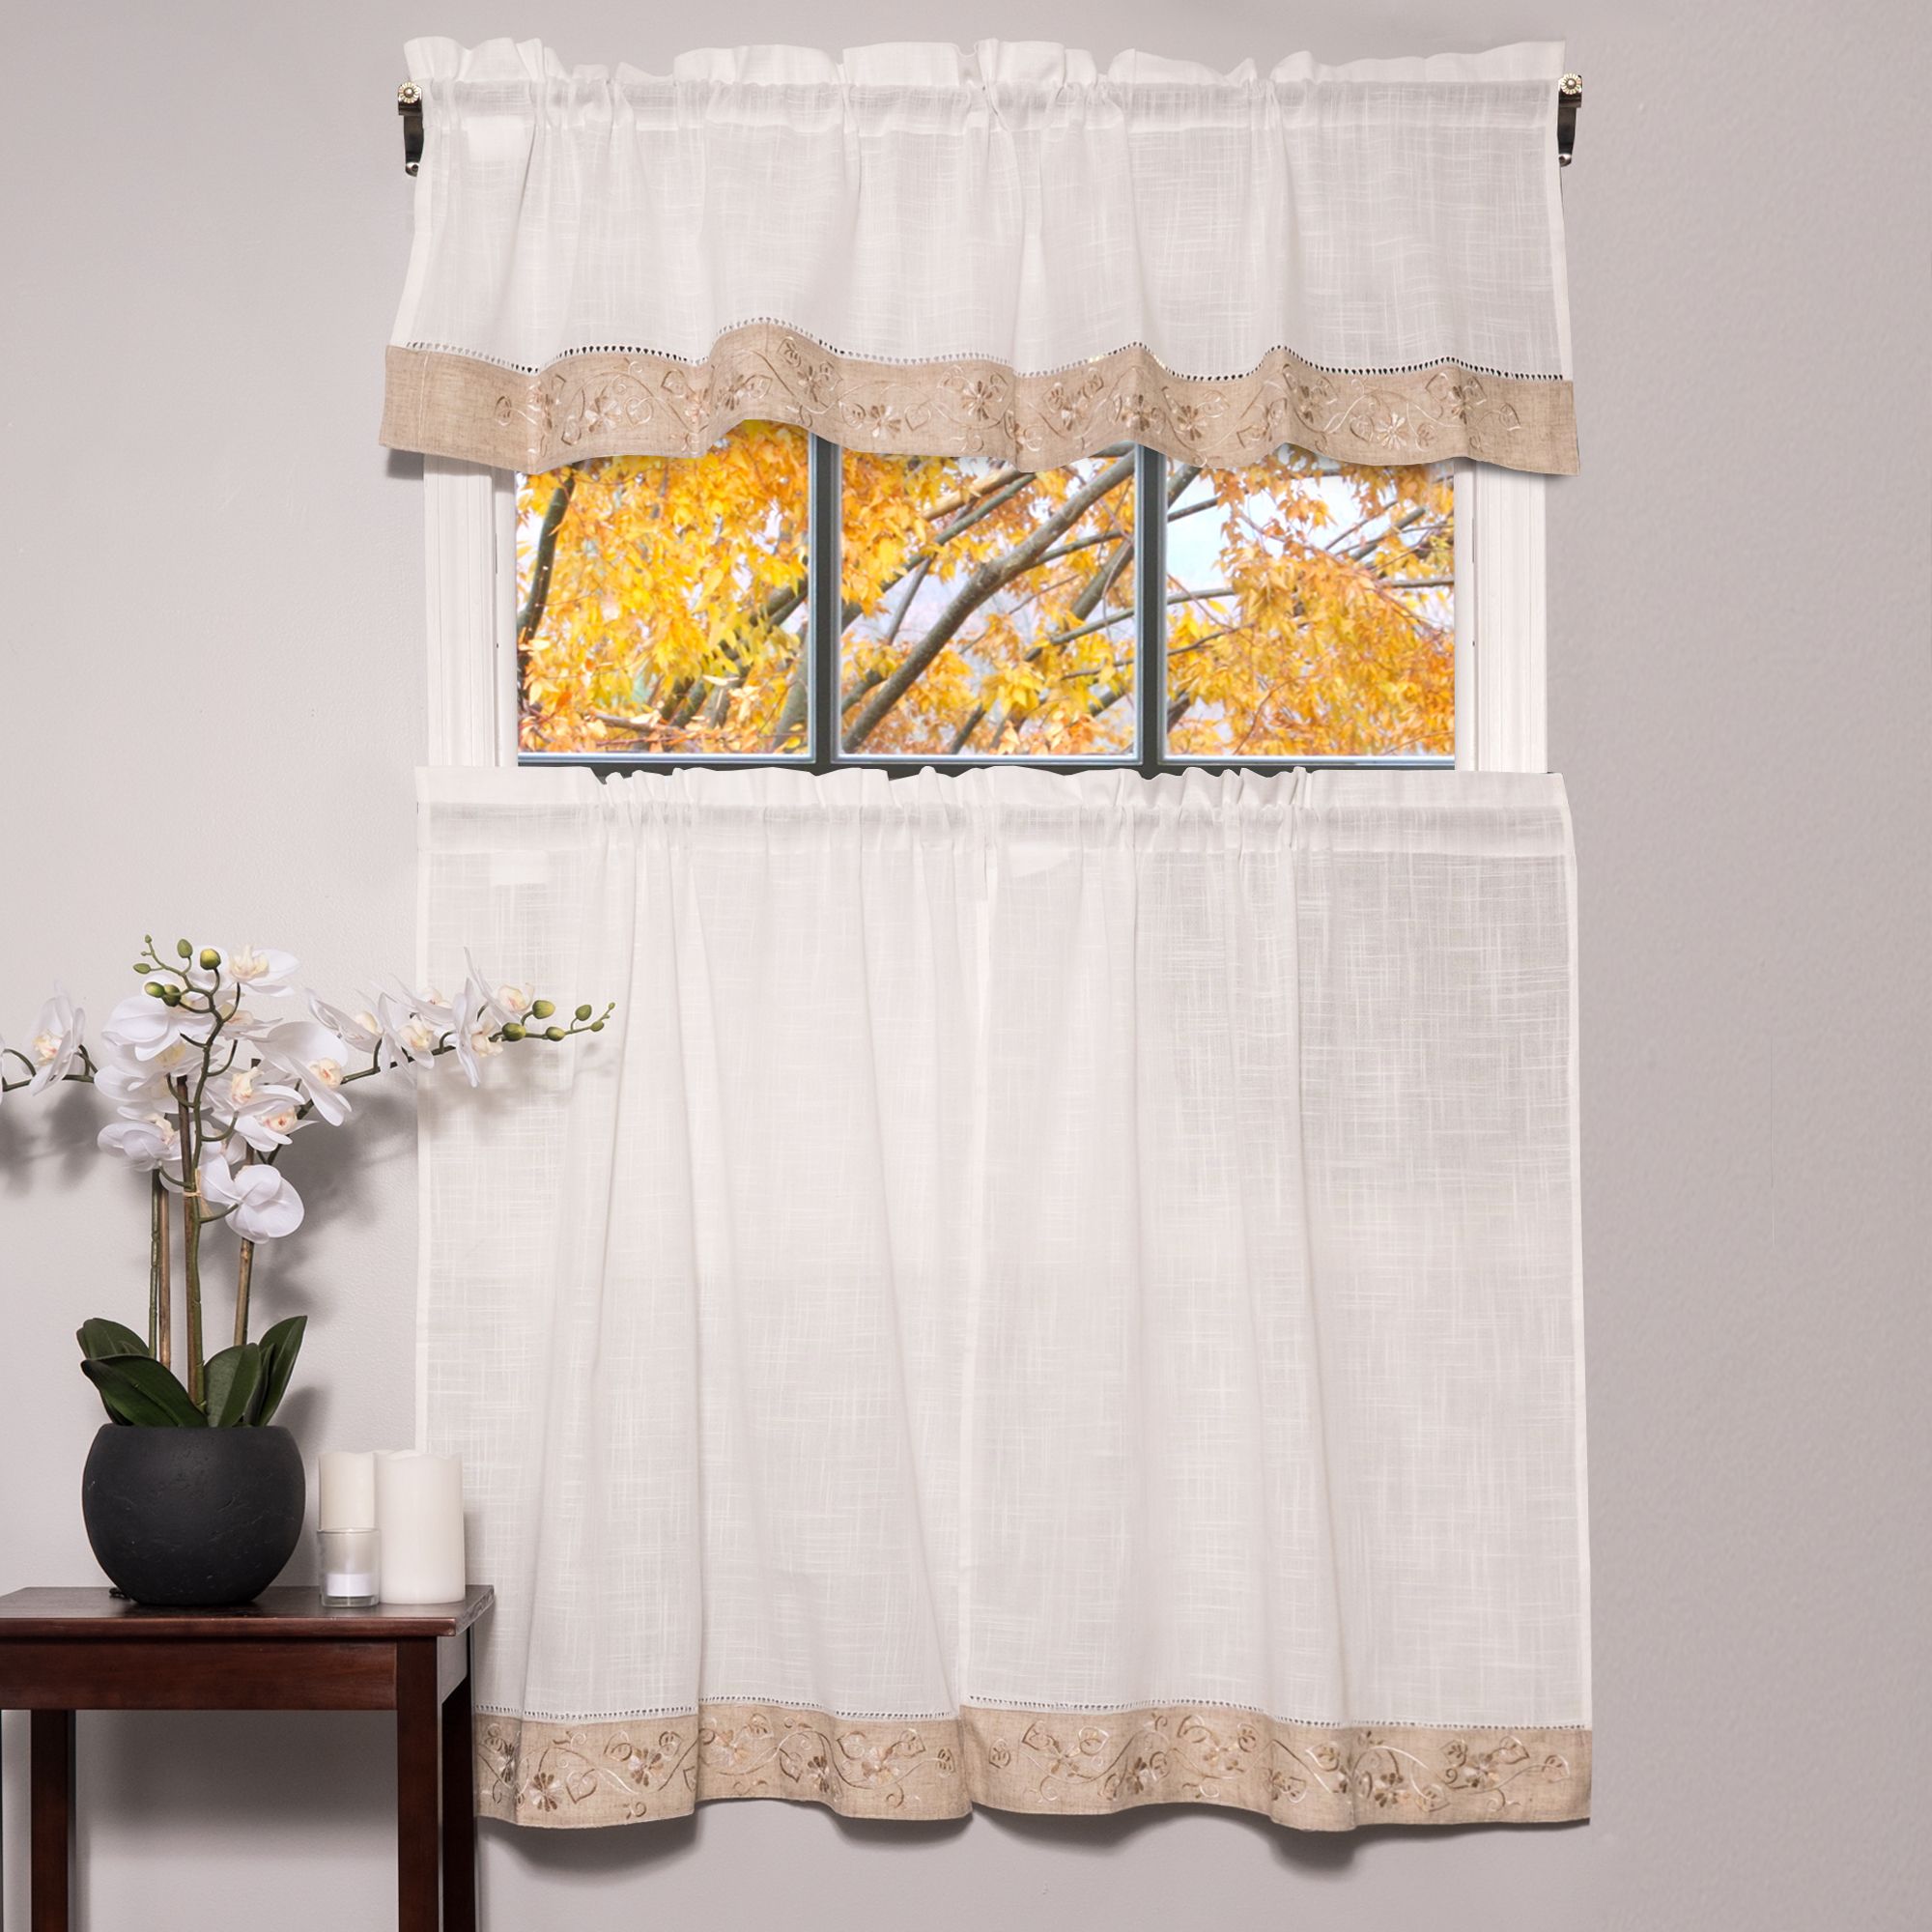 Oakwood Linen Style Kitchen Window Curtain 58" X 36" Kitchen Curtains, Set  Of 2, Natural Intended For Oakwood Linen Style Decorative Window Curtain Tier Sets (View 4 of 20)